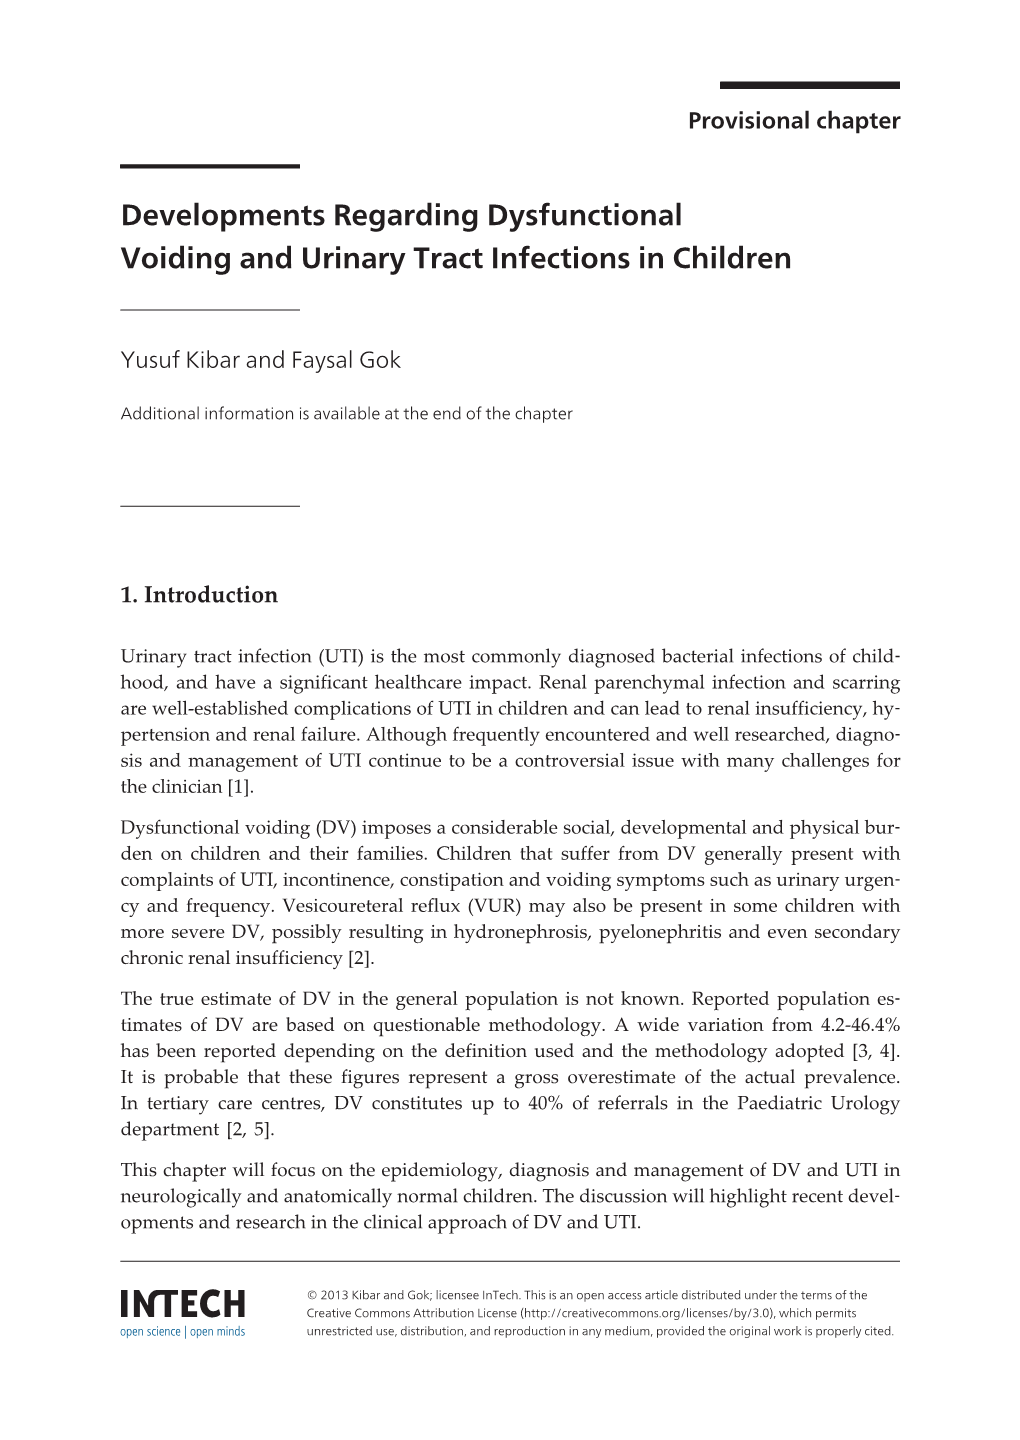 Developments Regarding Dysfunctional Voiding and Urinary Tract Infections in Children